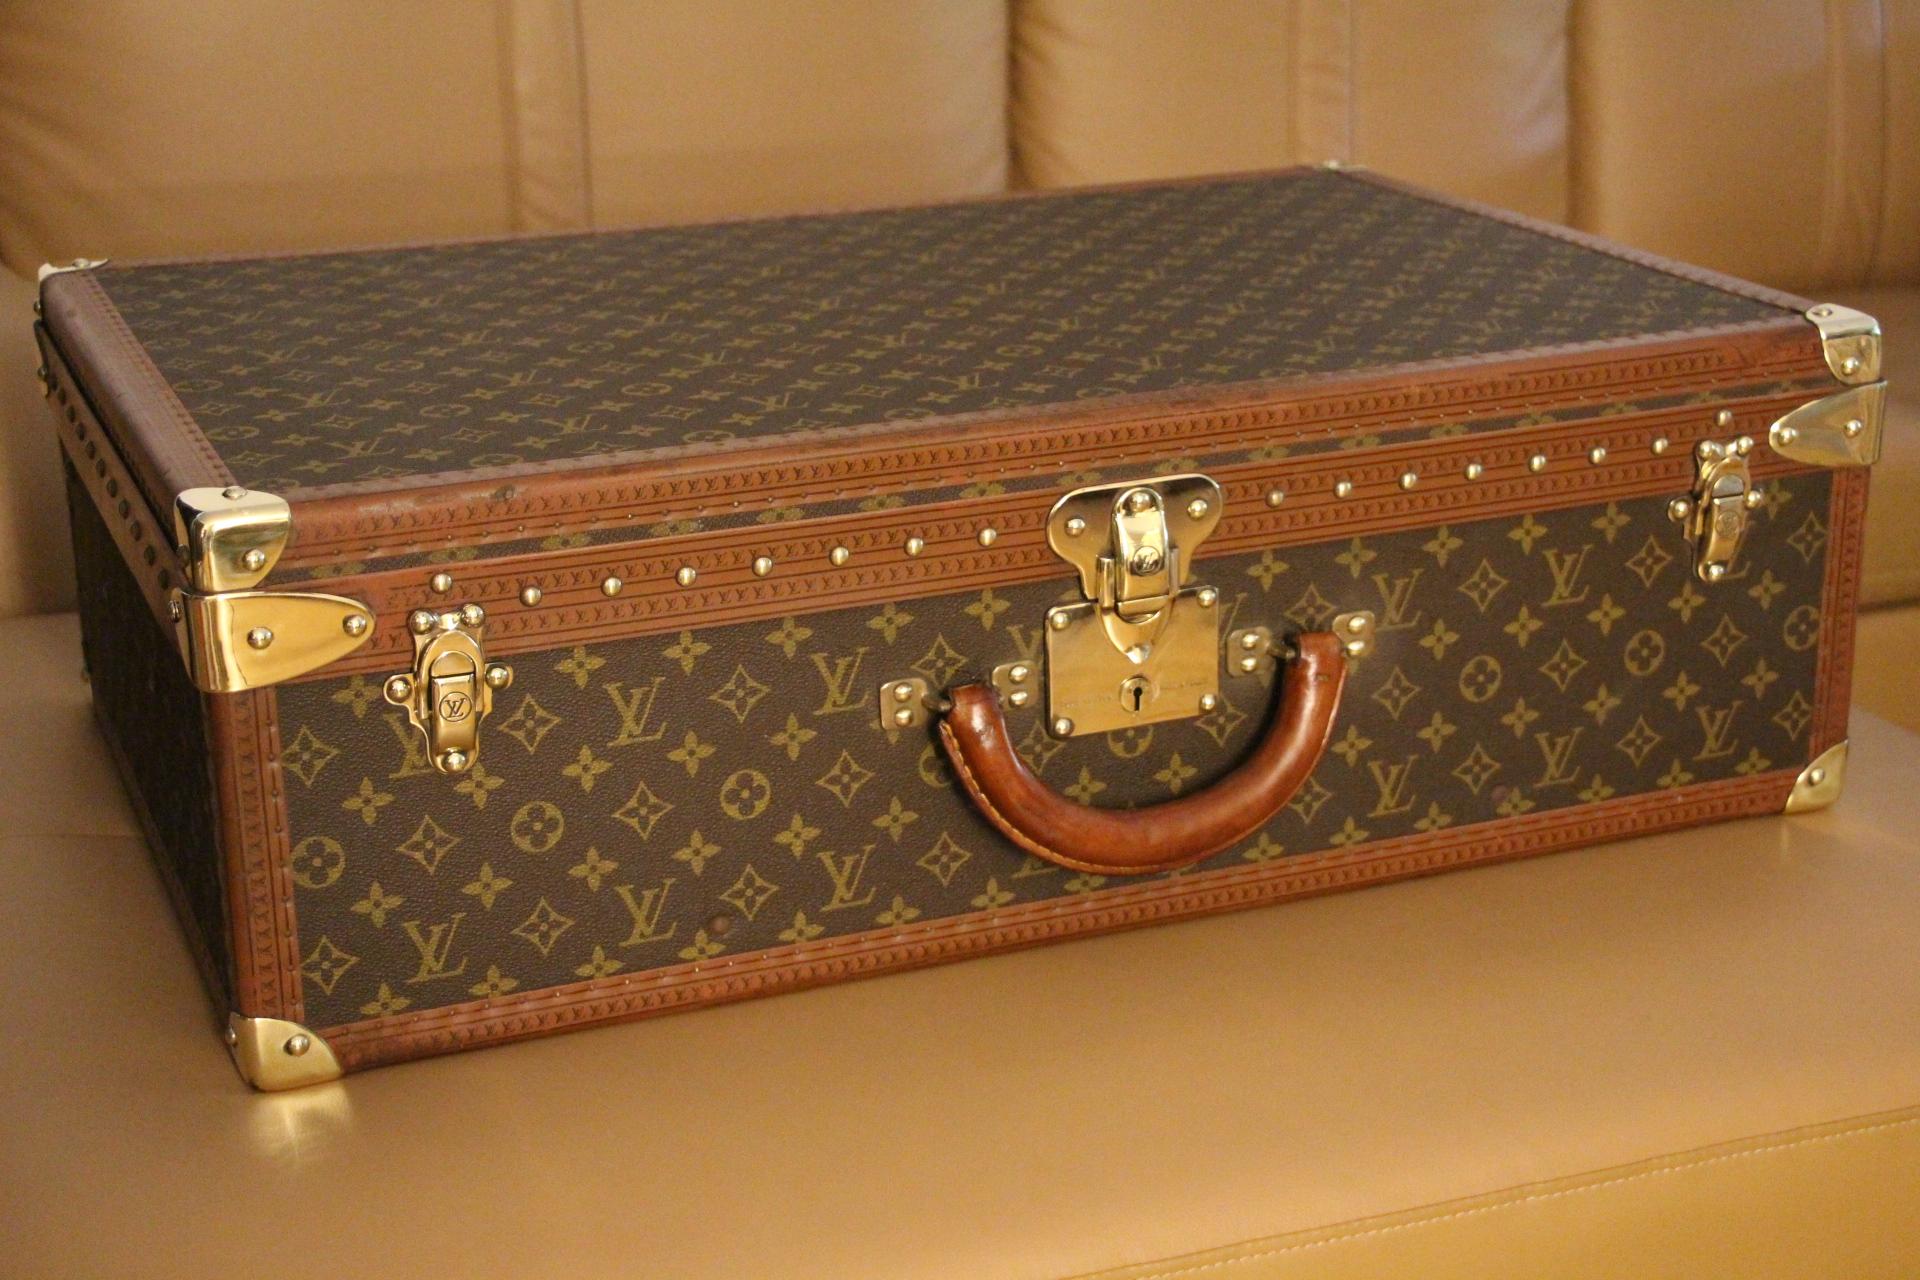 This is a magnificent Louis Vuitton Alzer monogramm suitcase. It features 
all Louis Vuitton stamped solid brass fittings: locks, clasps and studs.Its trim is stamped LV everywhere too.
It has got a large and comfortable all leather handle .
As to